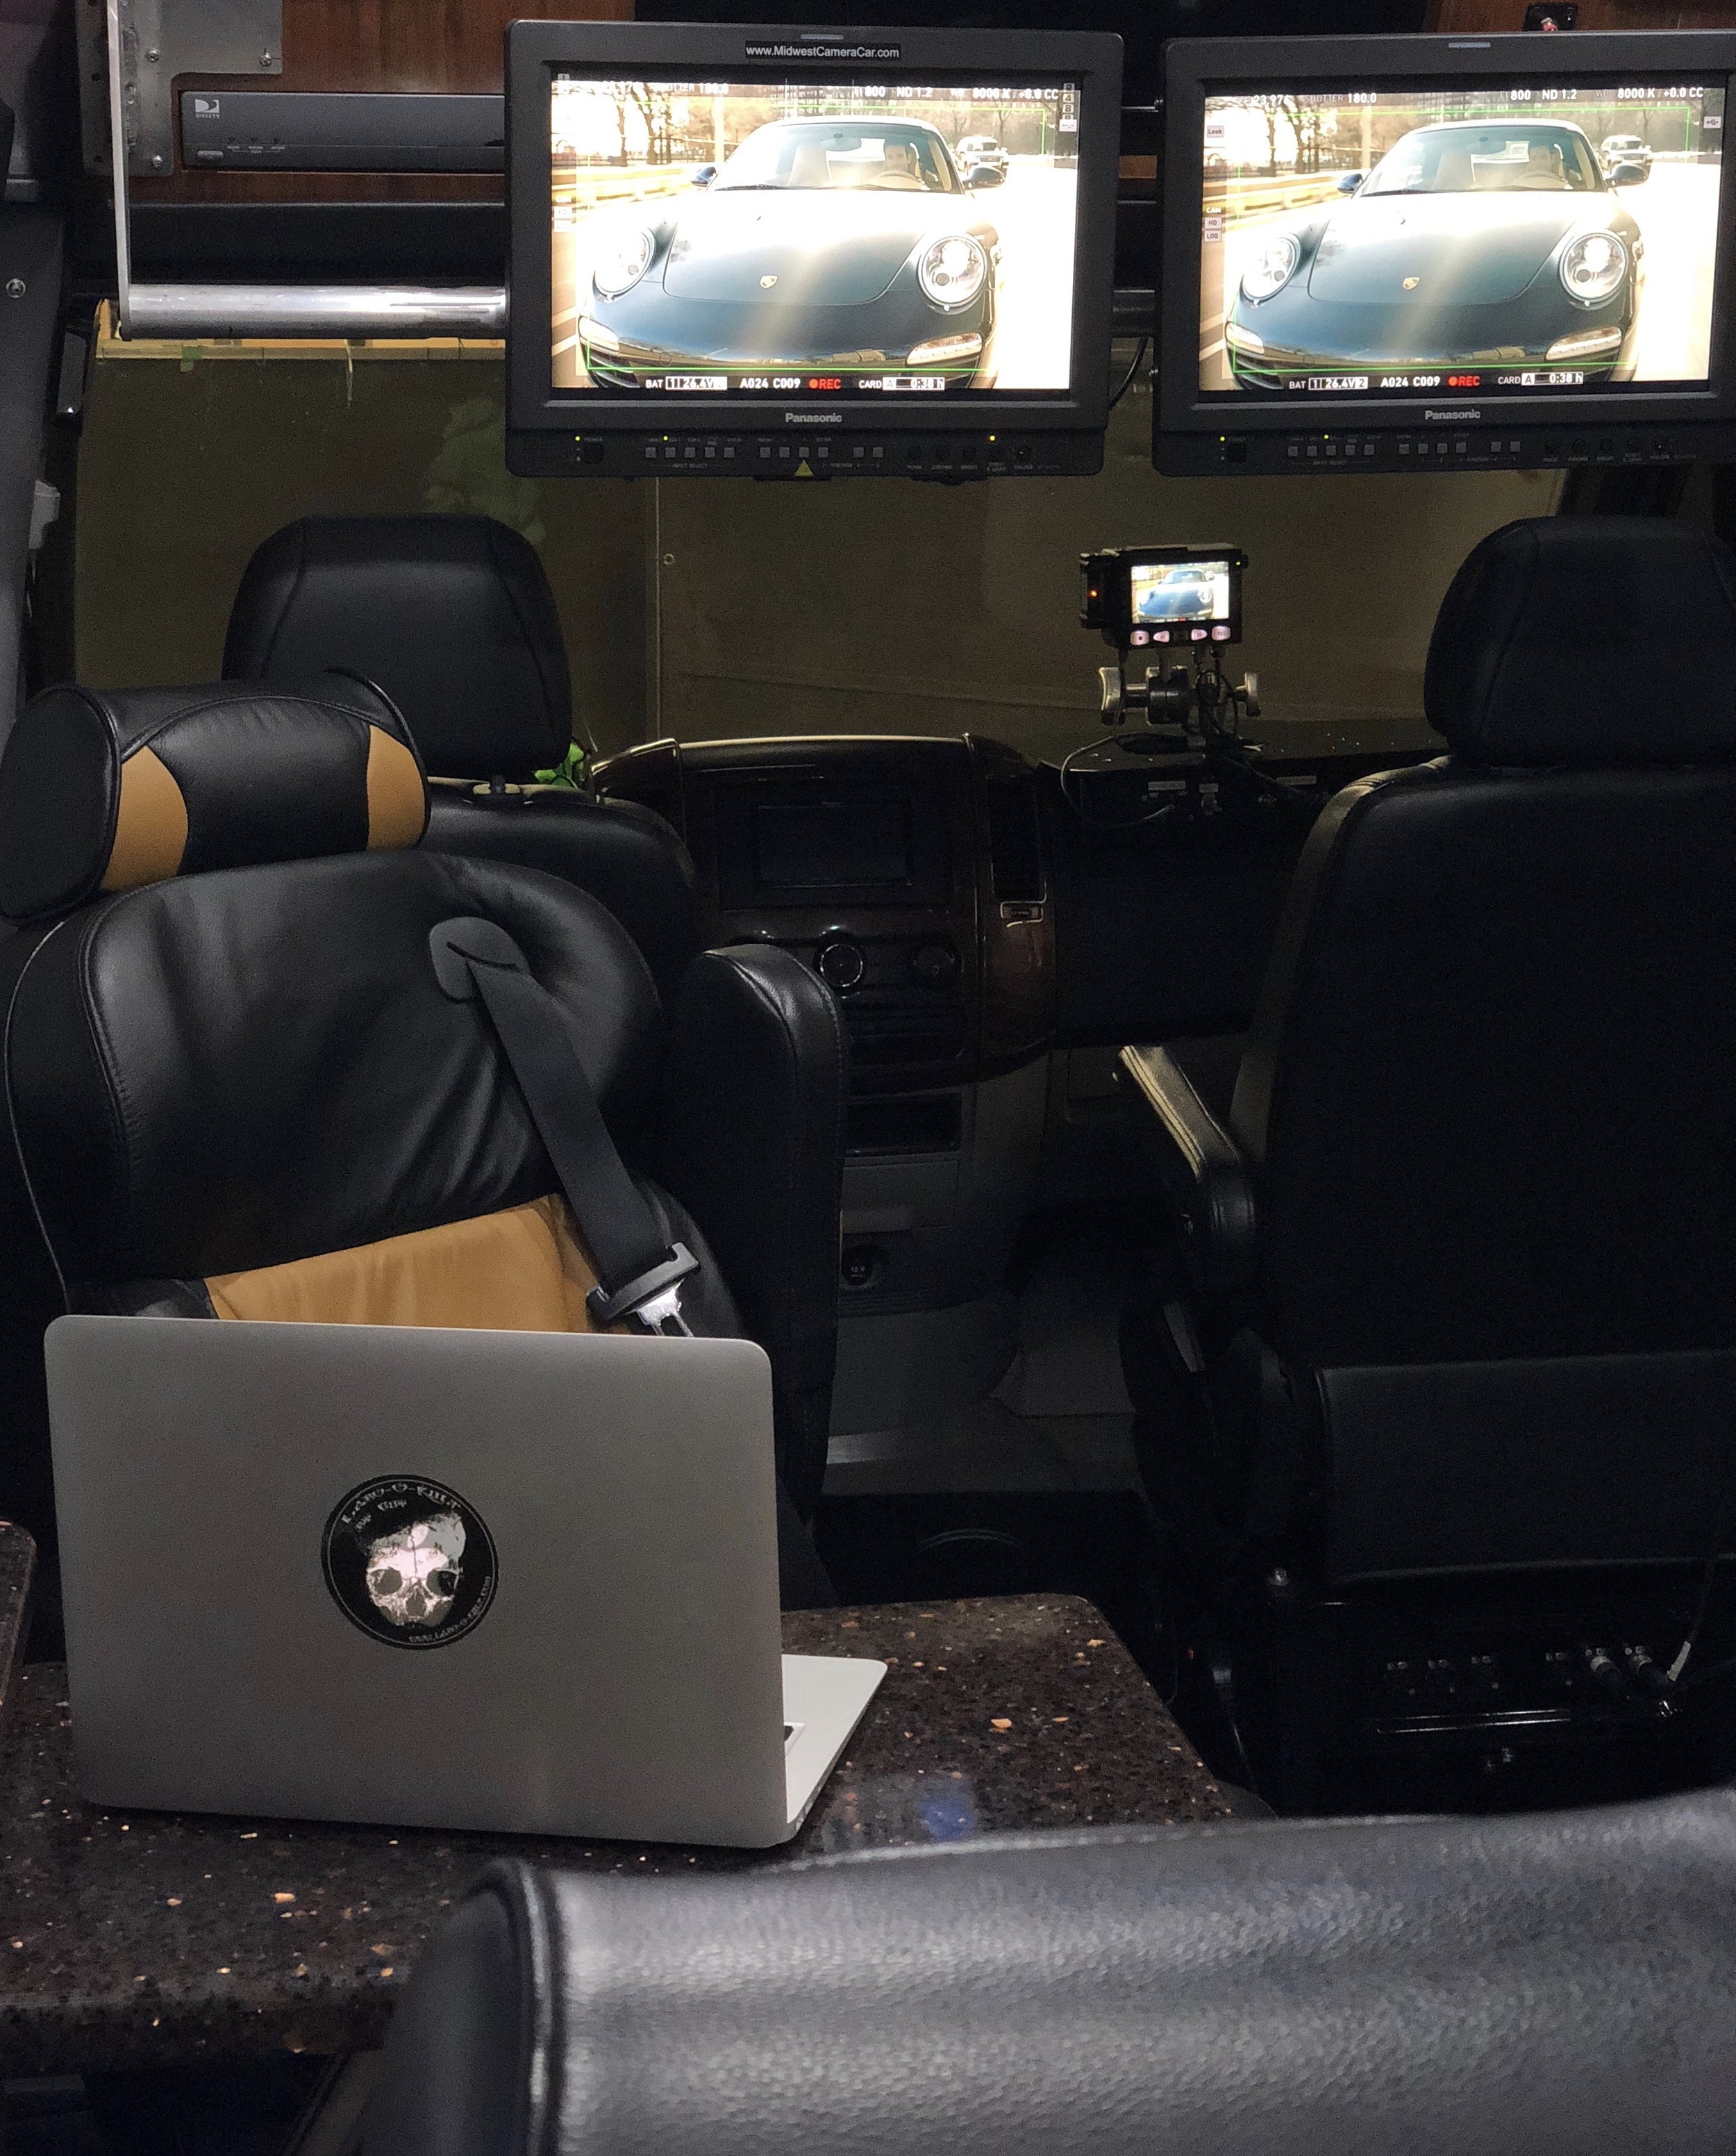 Video Village Monitor and PIX 240.  Executive, Client Van, Video Village Van, Chase Van, Command Van.